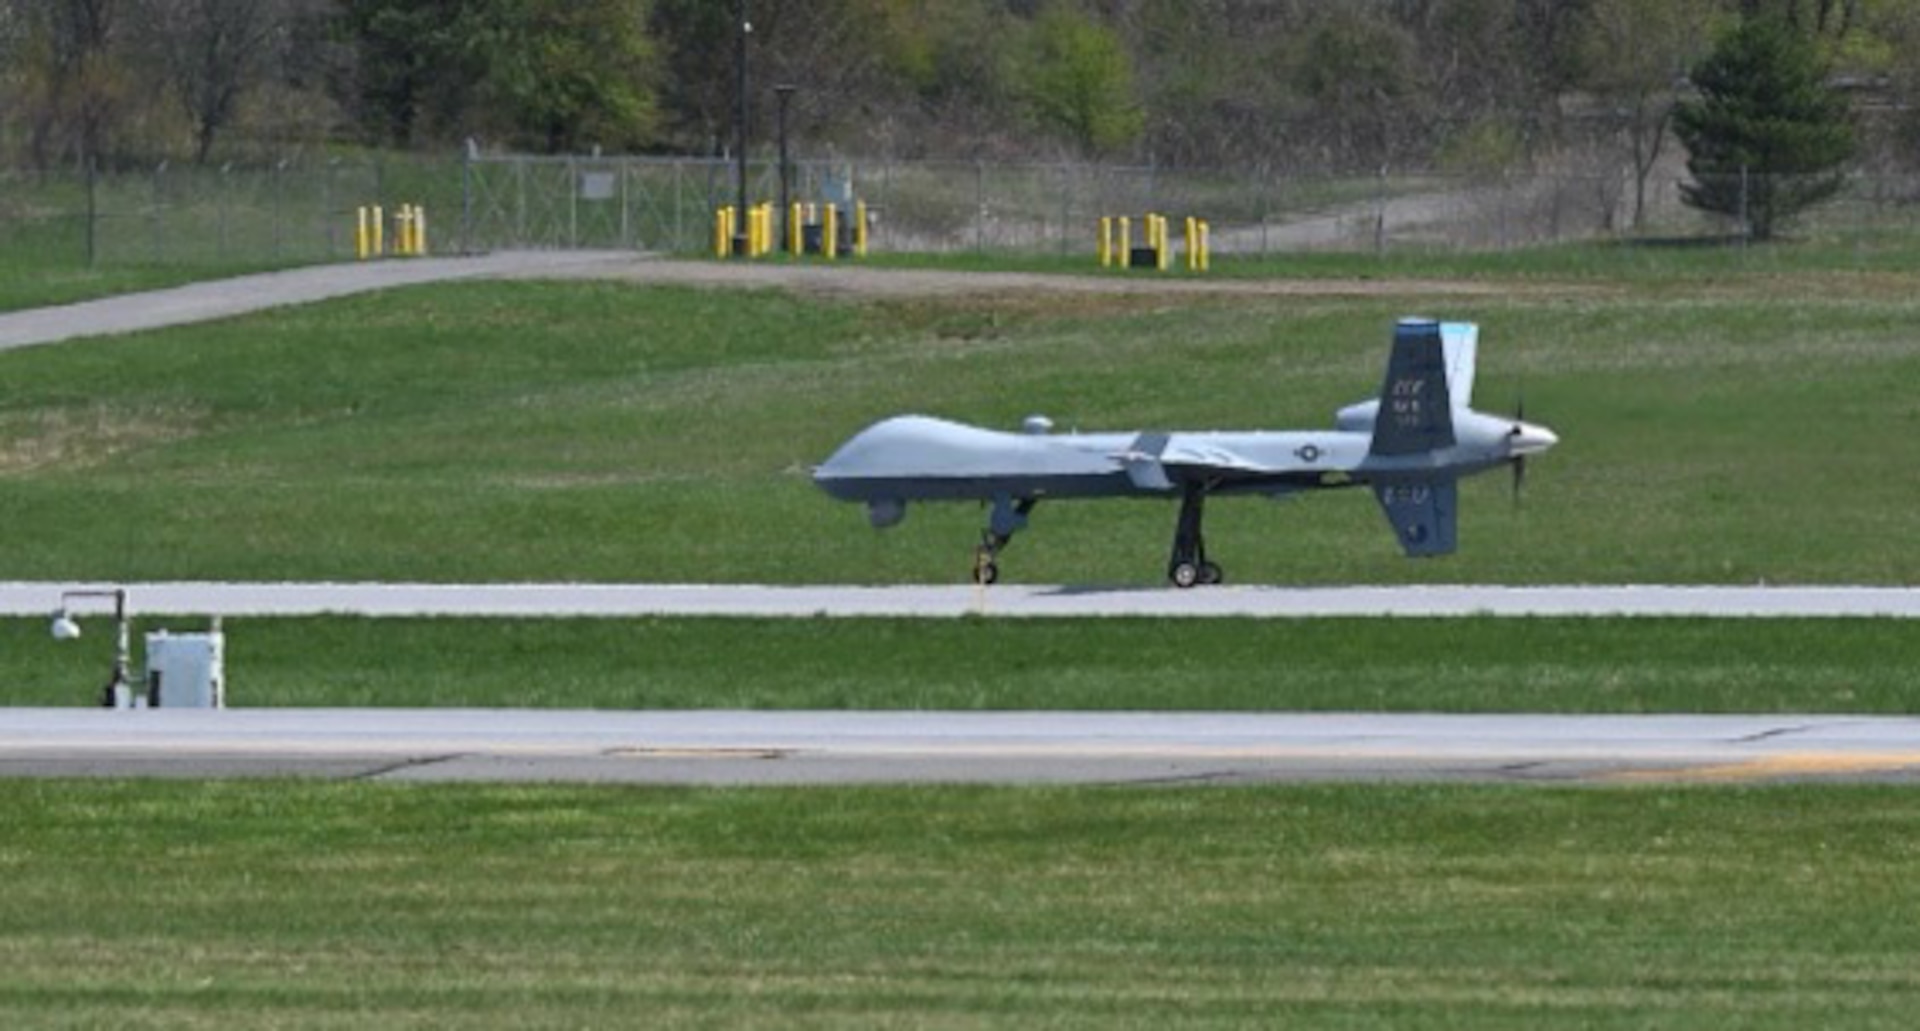 An MQ-9 Reaper remotely piloted aircraft lands at Griffiss International Airport in Rome, New York on May 5, 2022 as the 174th Attack Wing of the New York Air National Guard tests a new remote landing and takeoff capability.. This is the first time an MQ-9 flew from one commercial airport, in this case Hancock Field International Airport in Syracuse, to another, the airport in Rome.